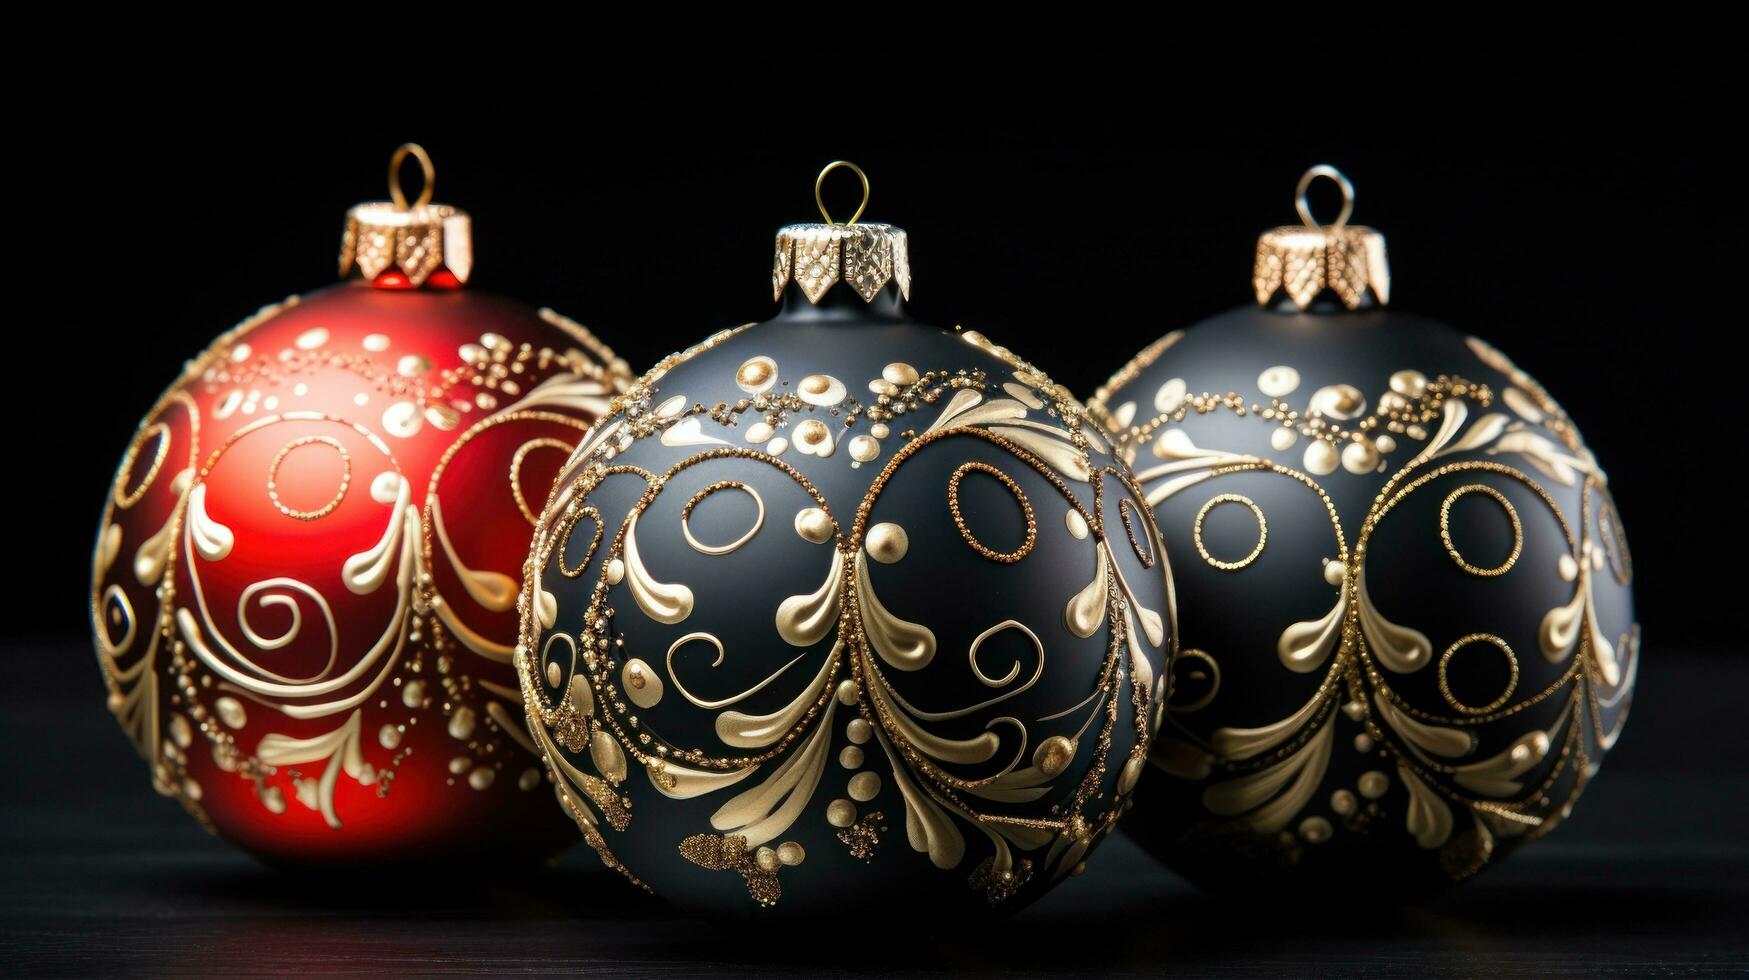 Elegant ornaments. Gold, silver, and red ornaments on a black background photo